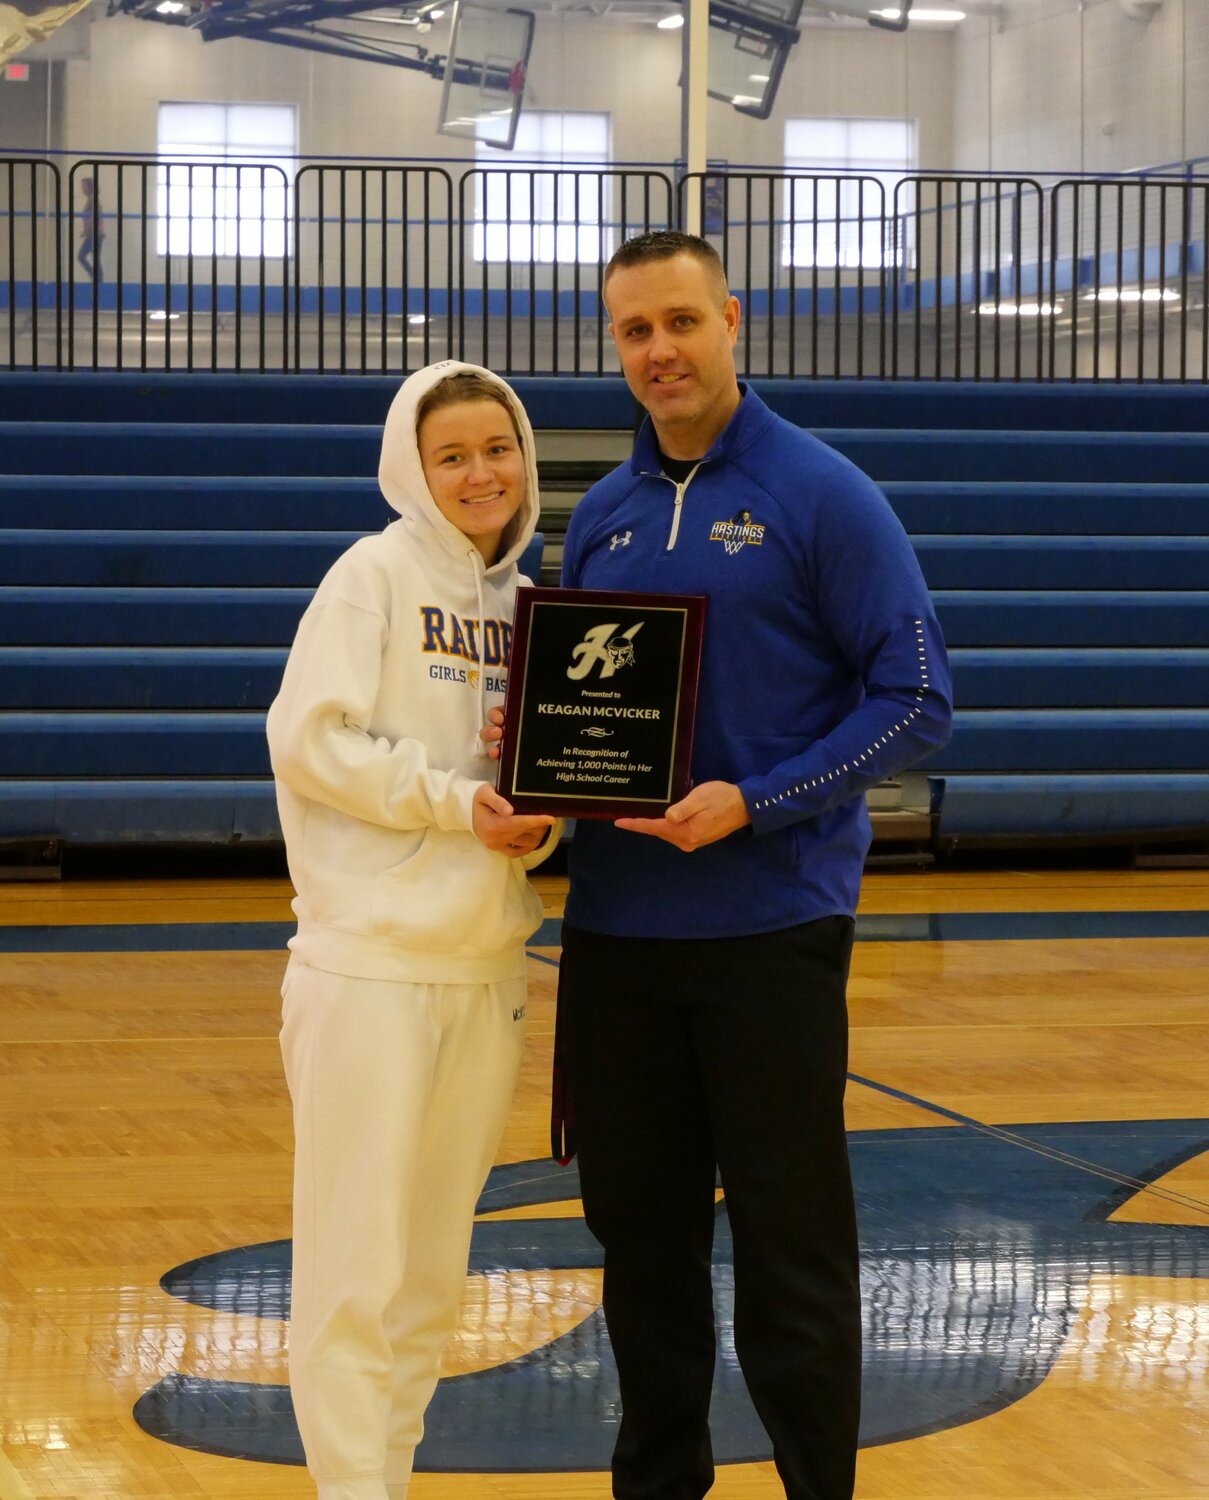 Keagan McVicker was presented a plaque marking 1,000 points in her Hastings Raider career by coach Rick Tavernier.